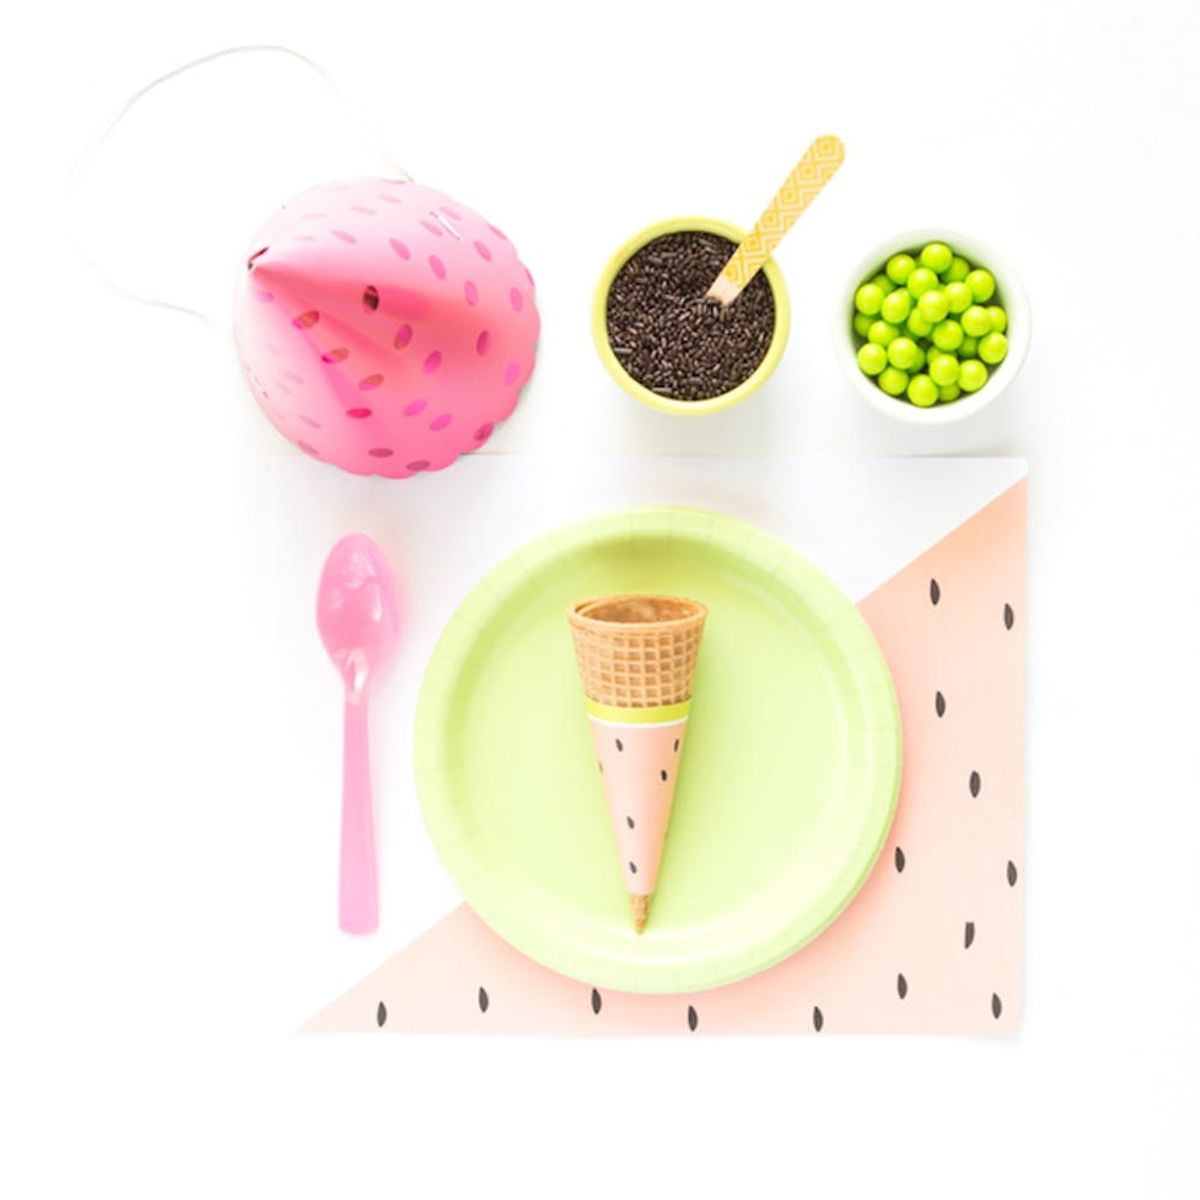 How to Make Free Printable Watermelon Placemats for Your Next Party